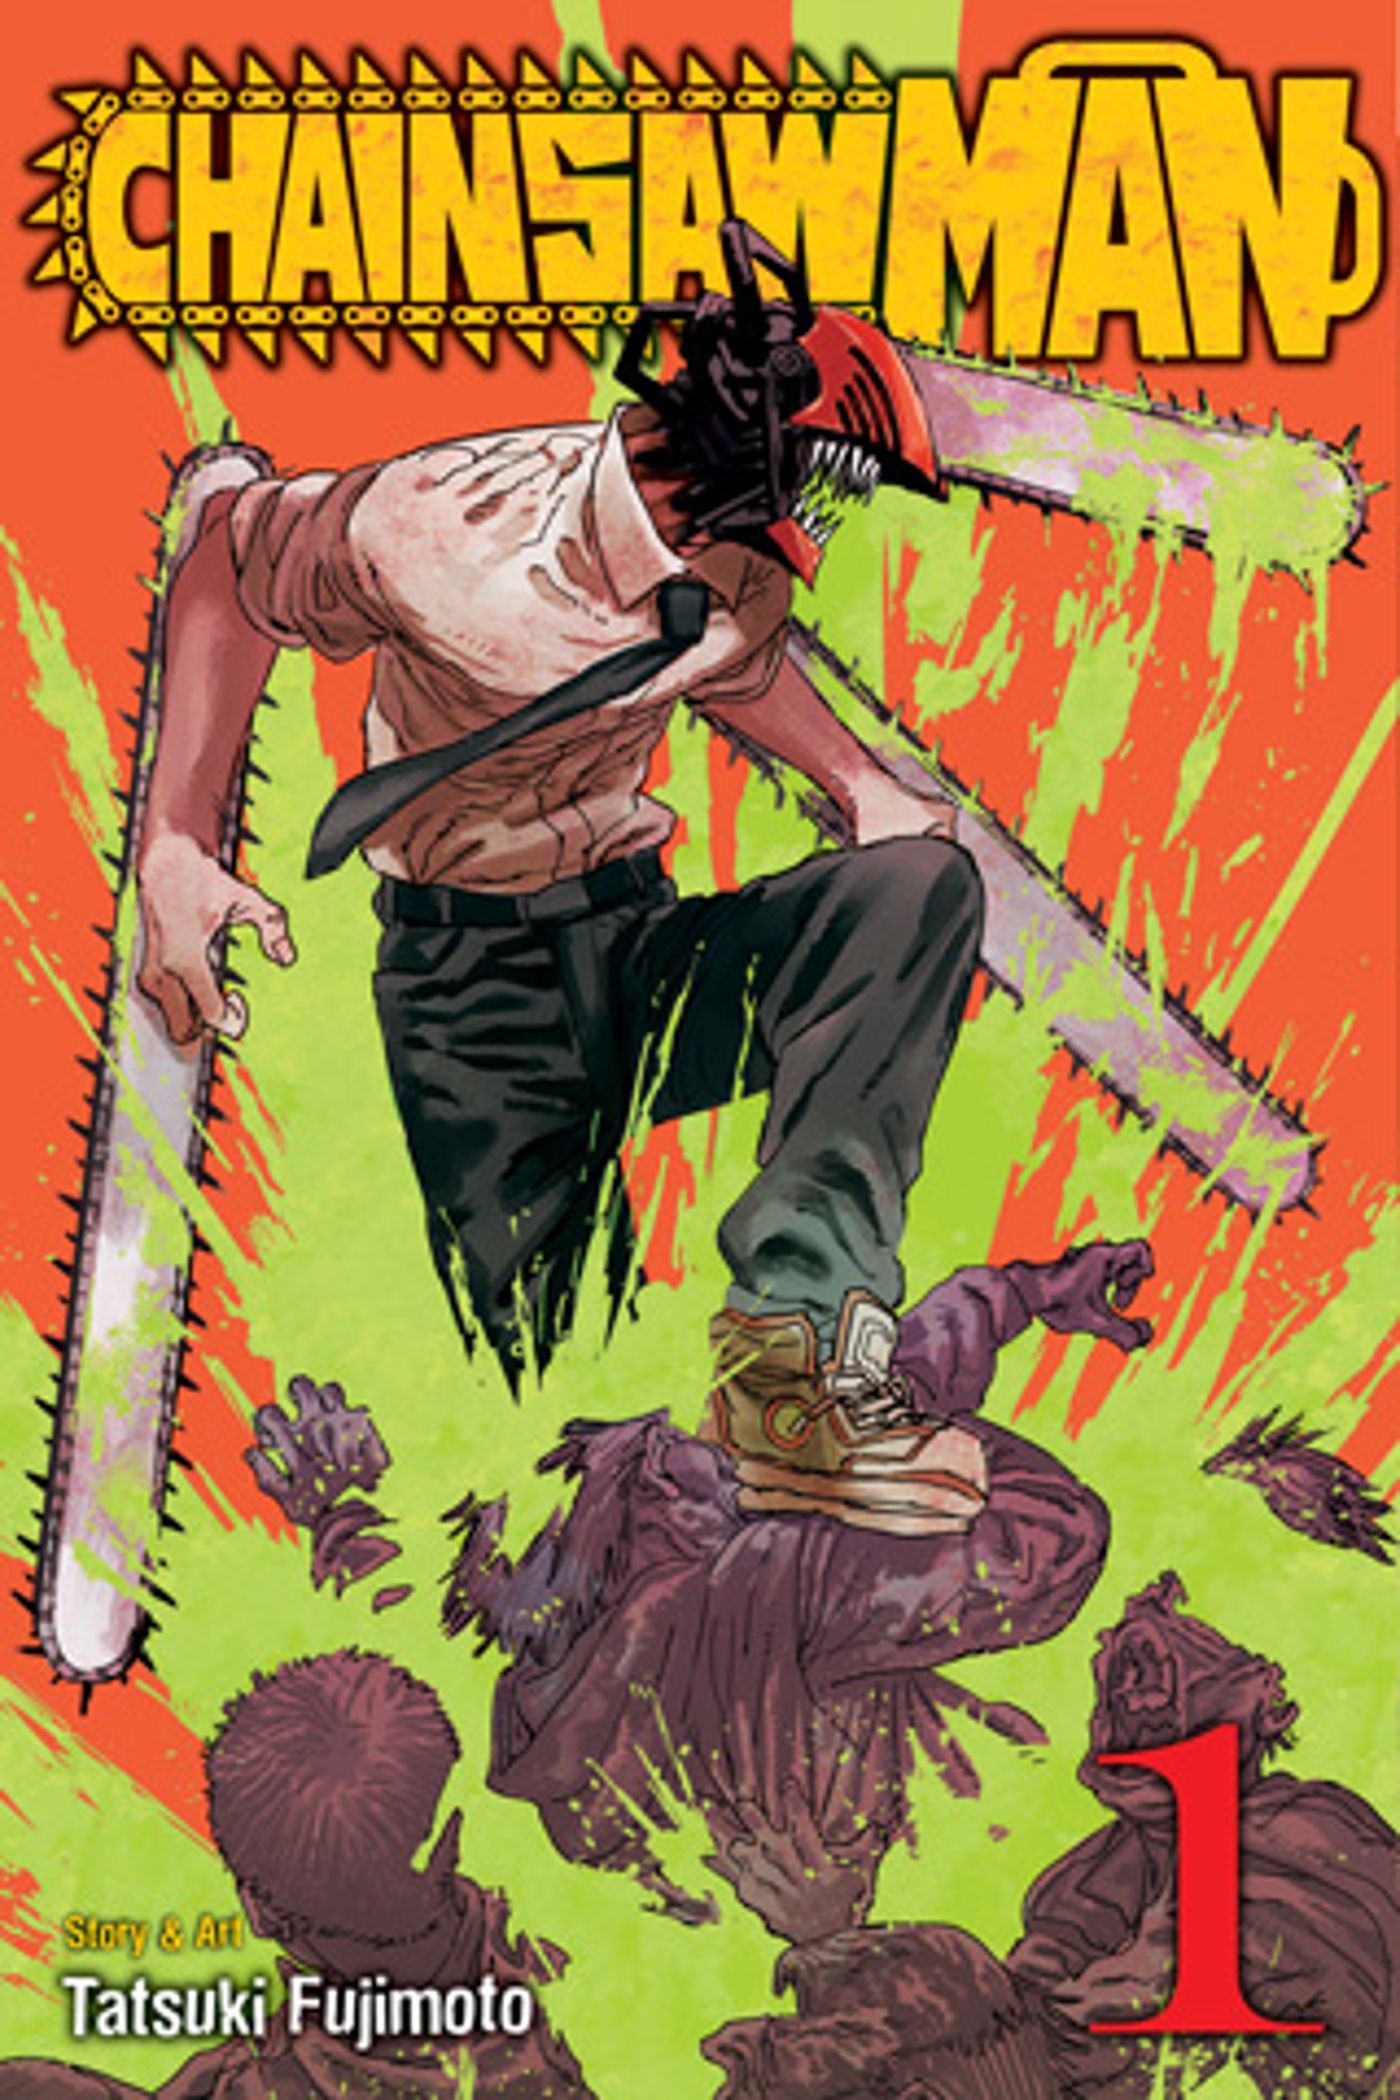 Chainsaw Man volume 1 cover depicting Denji as Chainsaw Man covered in green blood.